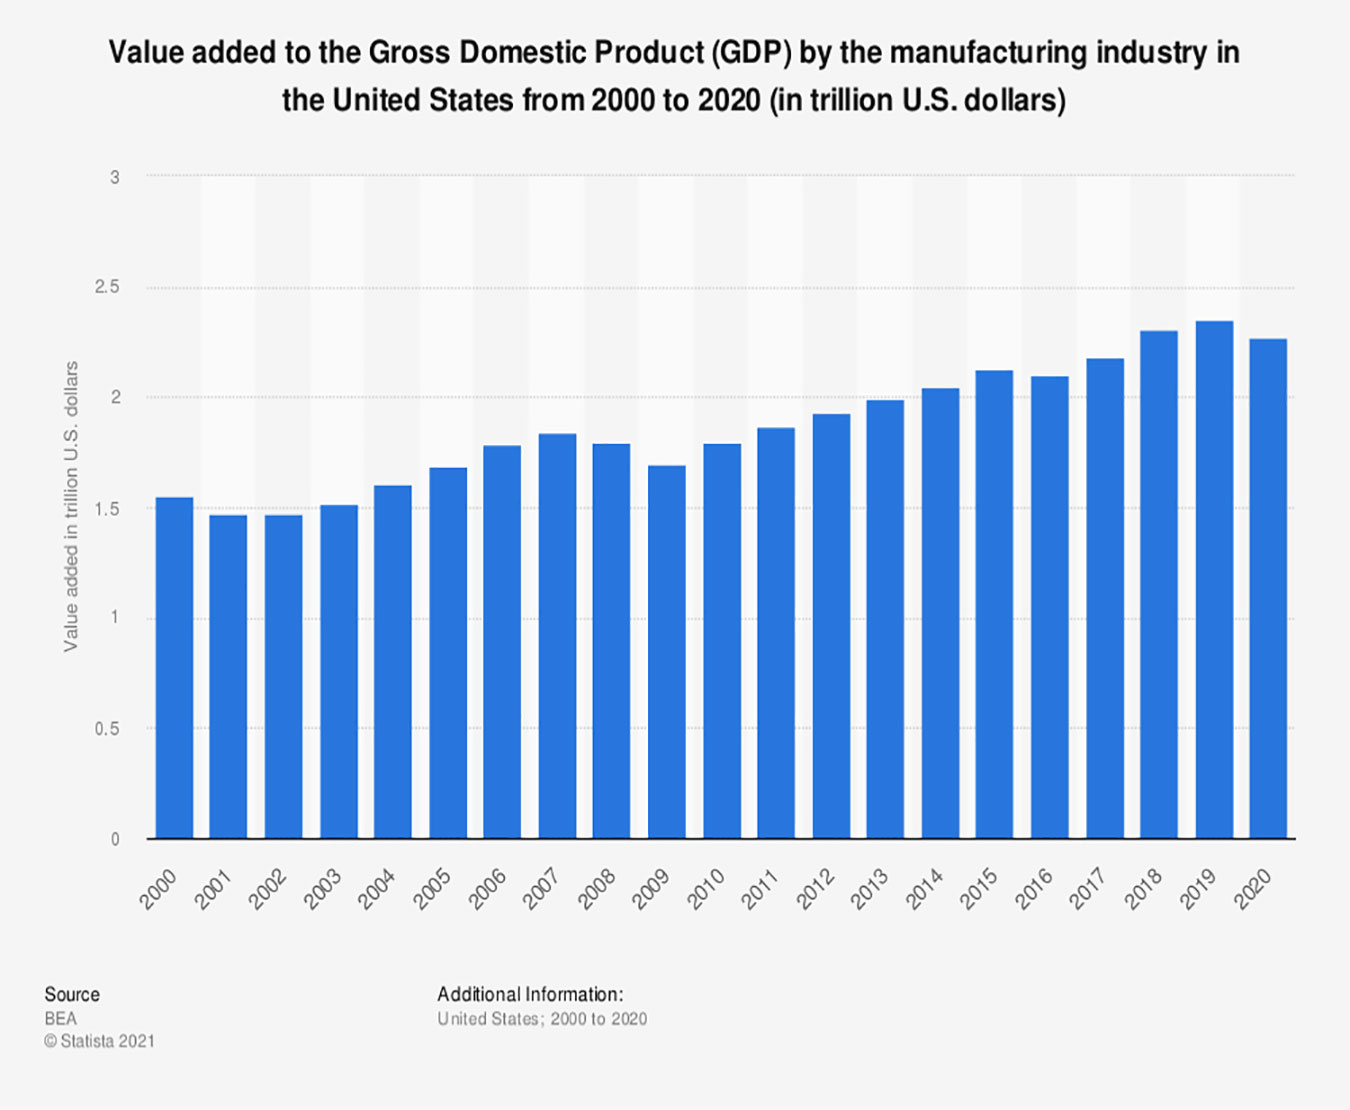 Economic Impact of Manufacturing: In 2020, the value added by the manufacturing industry to the Gross Domestic Product (GDP) of the United States was 2.27 trillion U.S. dollars. This is a slight decrease from the previous year, when 2.35 trillion U.S. dollars were added to the GDP by the manufacturing industry.